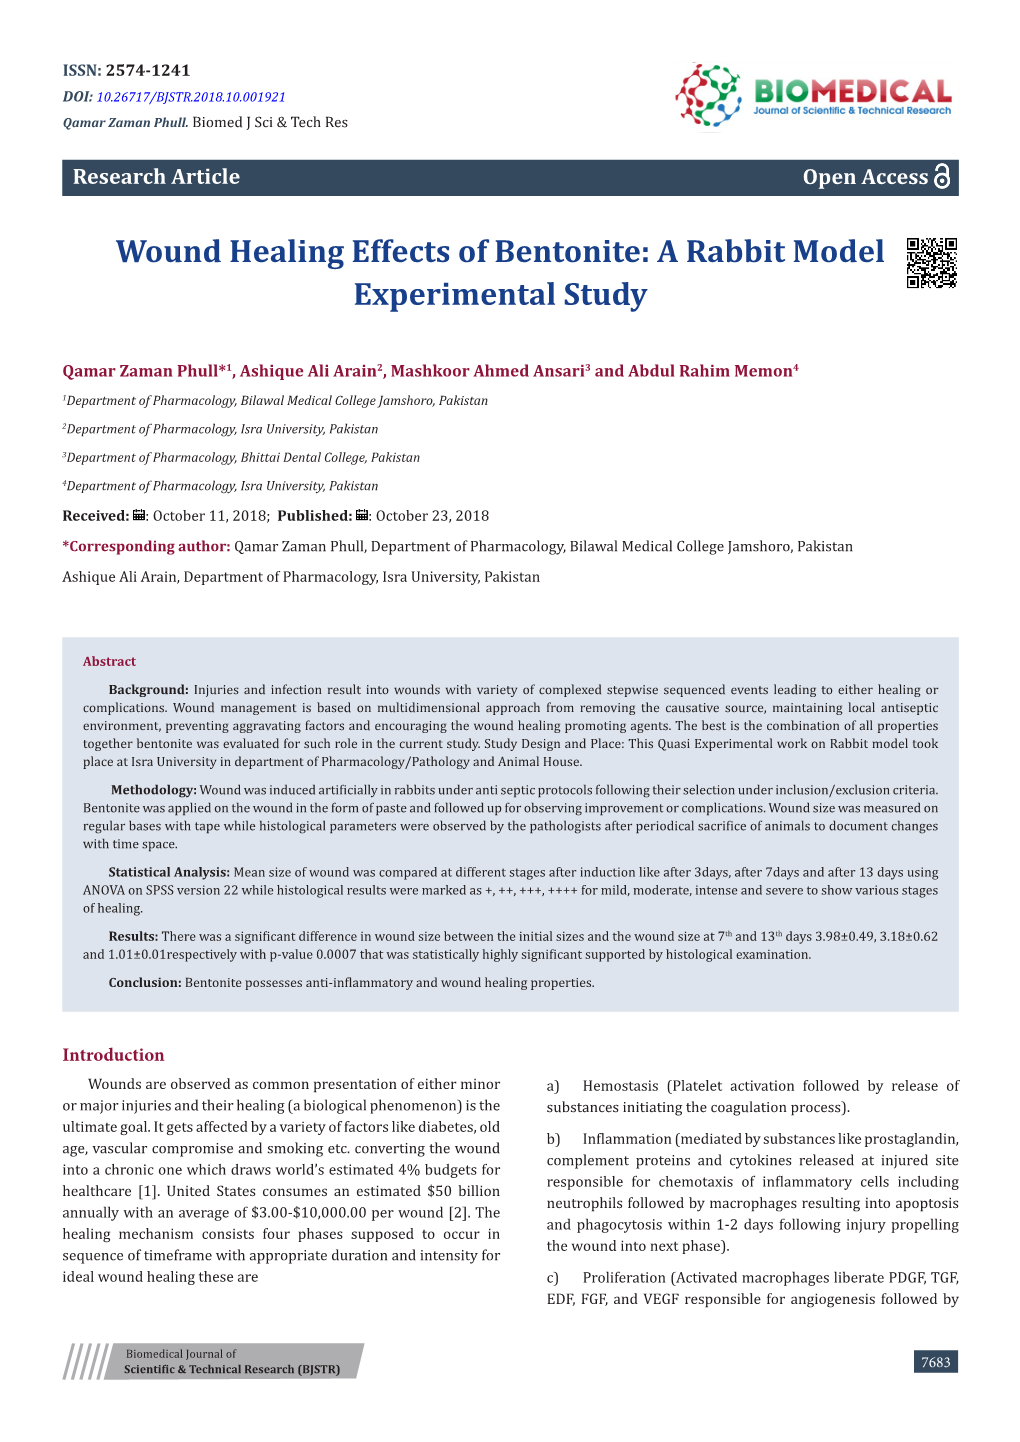 Wound Healing Effects of Bentonite: a Rabbit Model Experimental Study